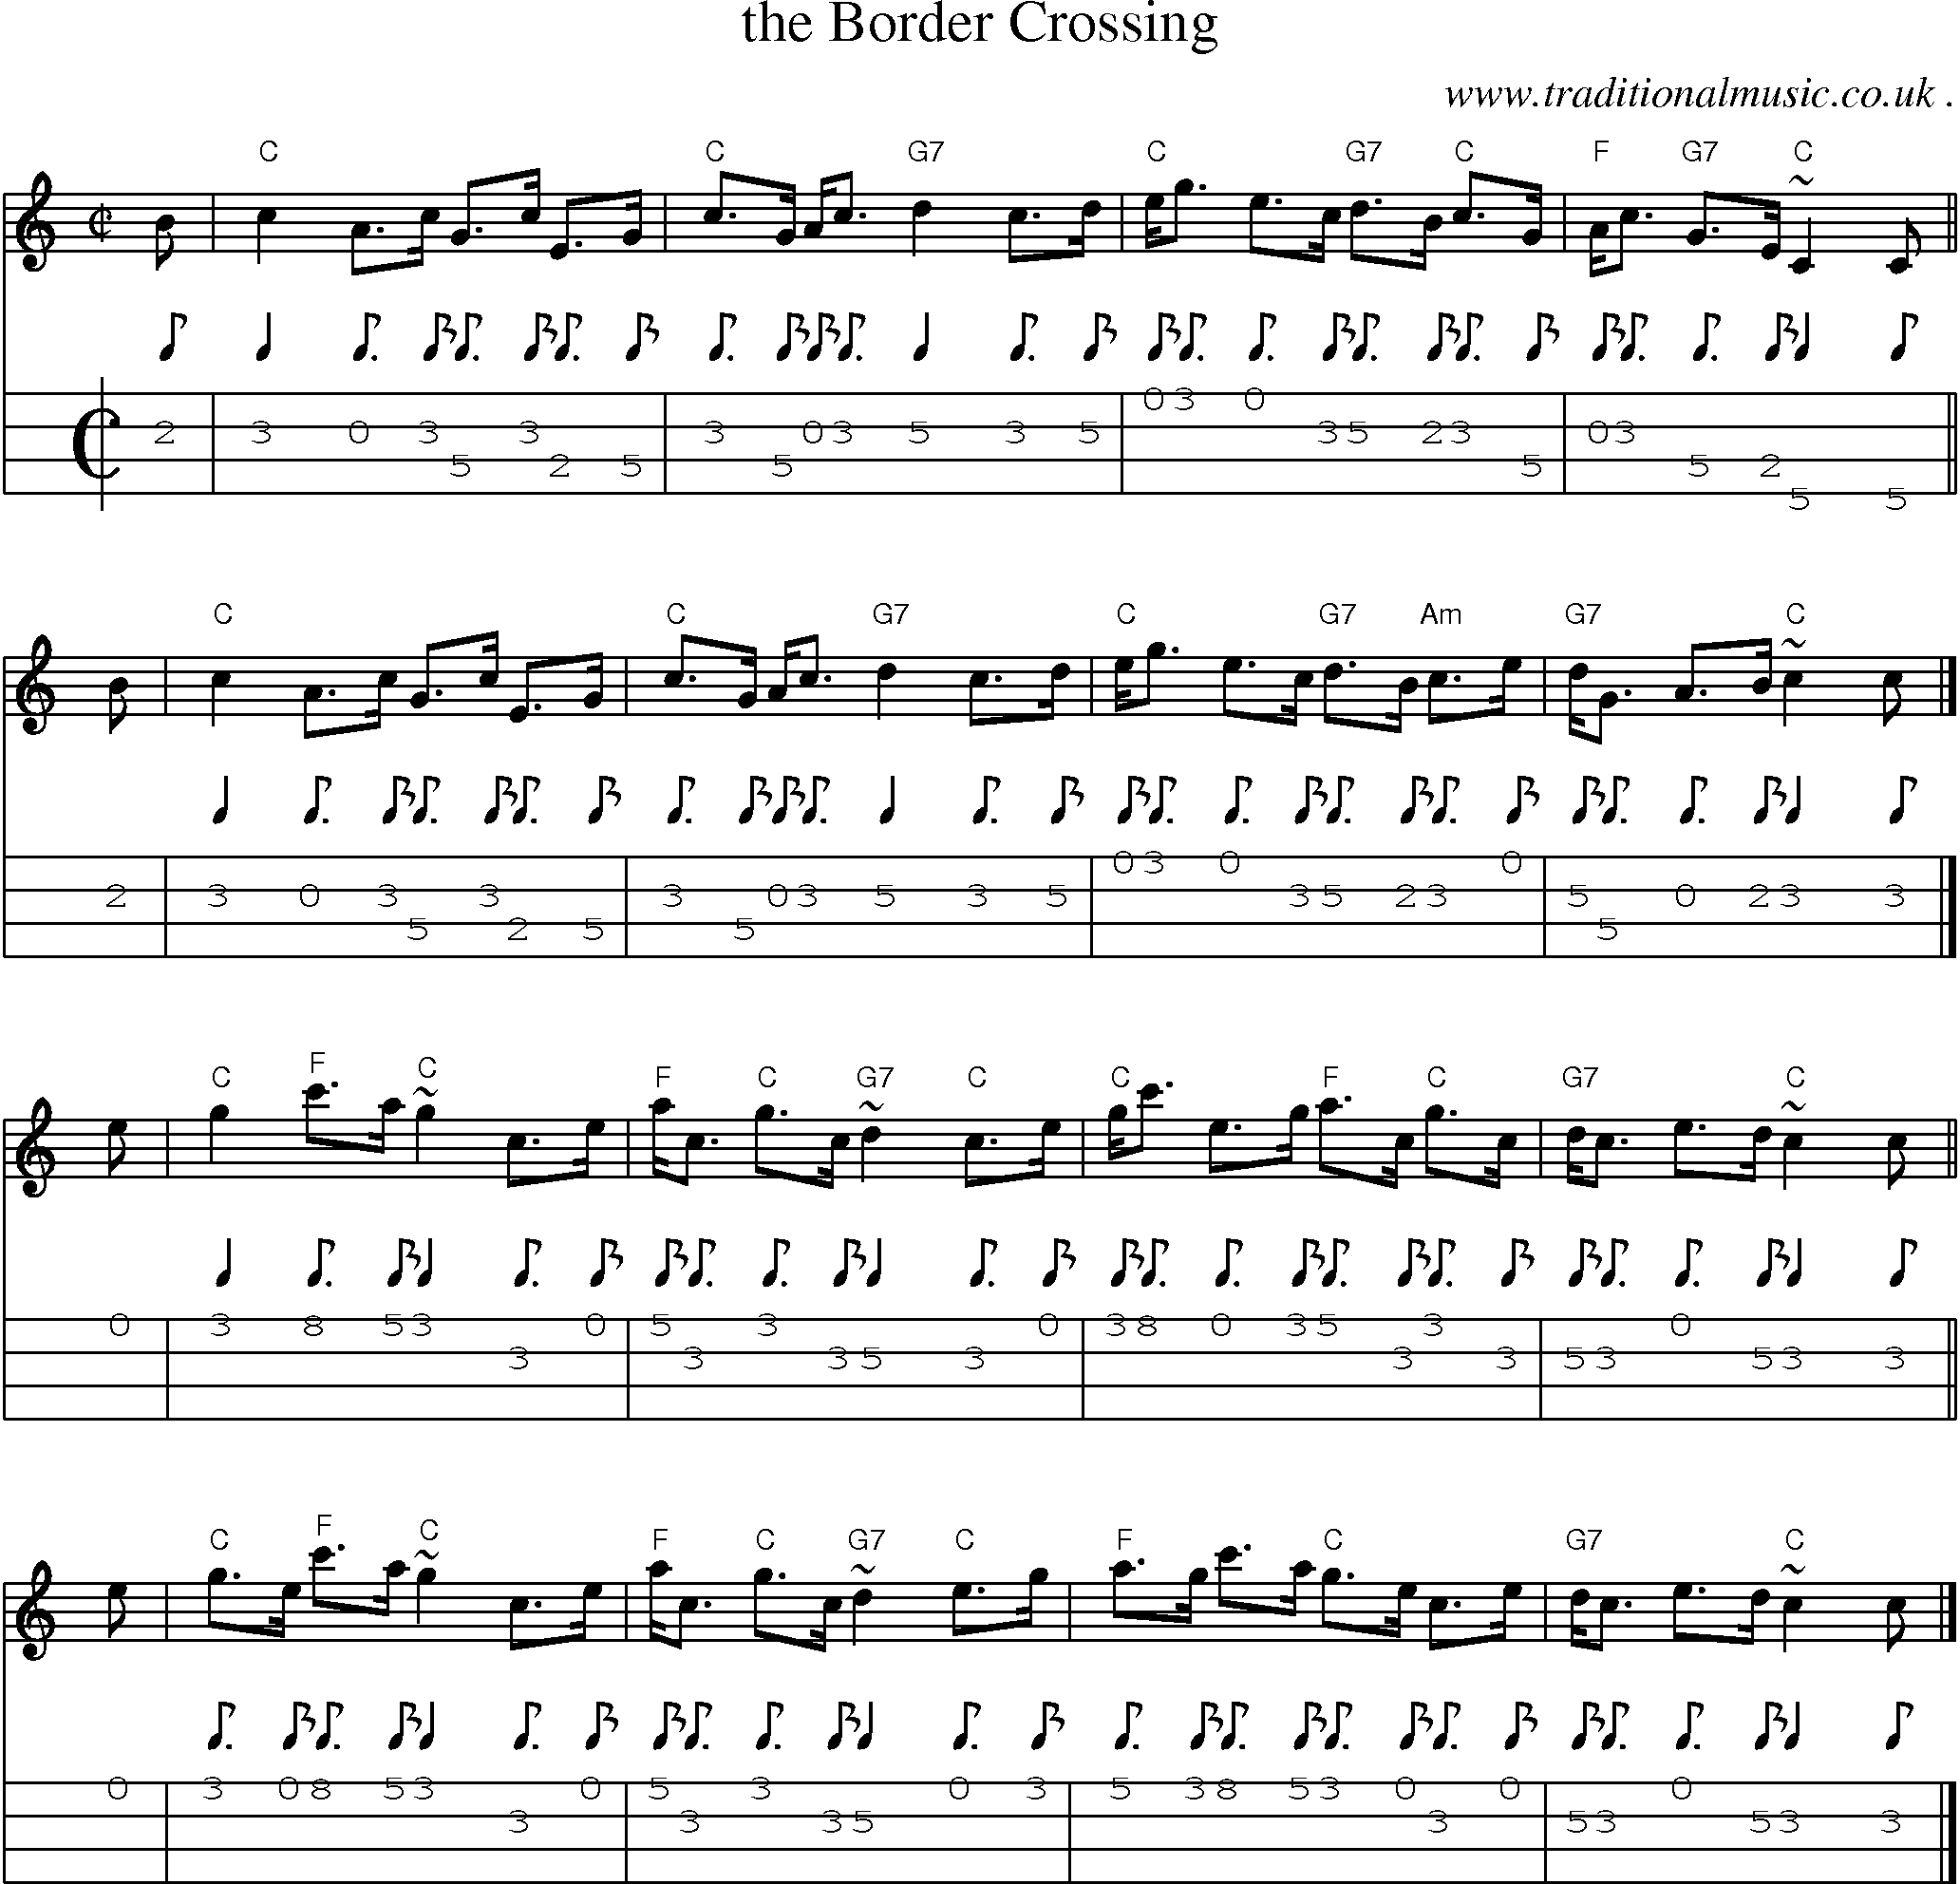 Sheet-music  score, Chords and Mandolin Tabs for The Border Crossing